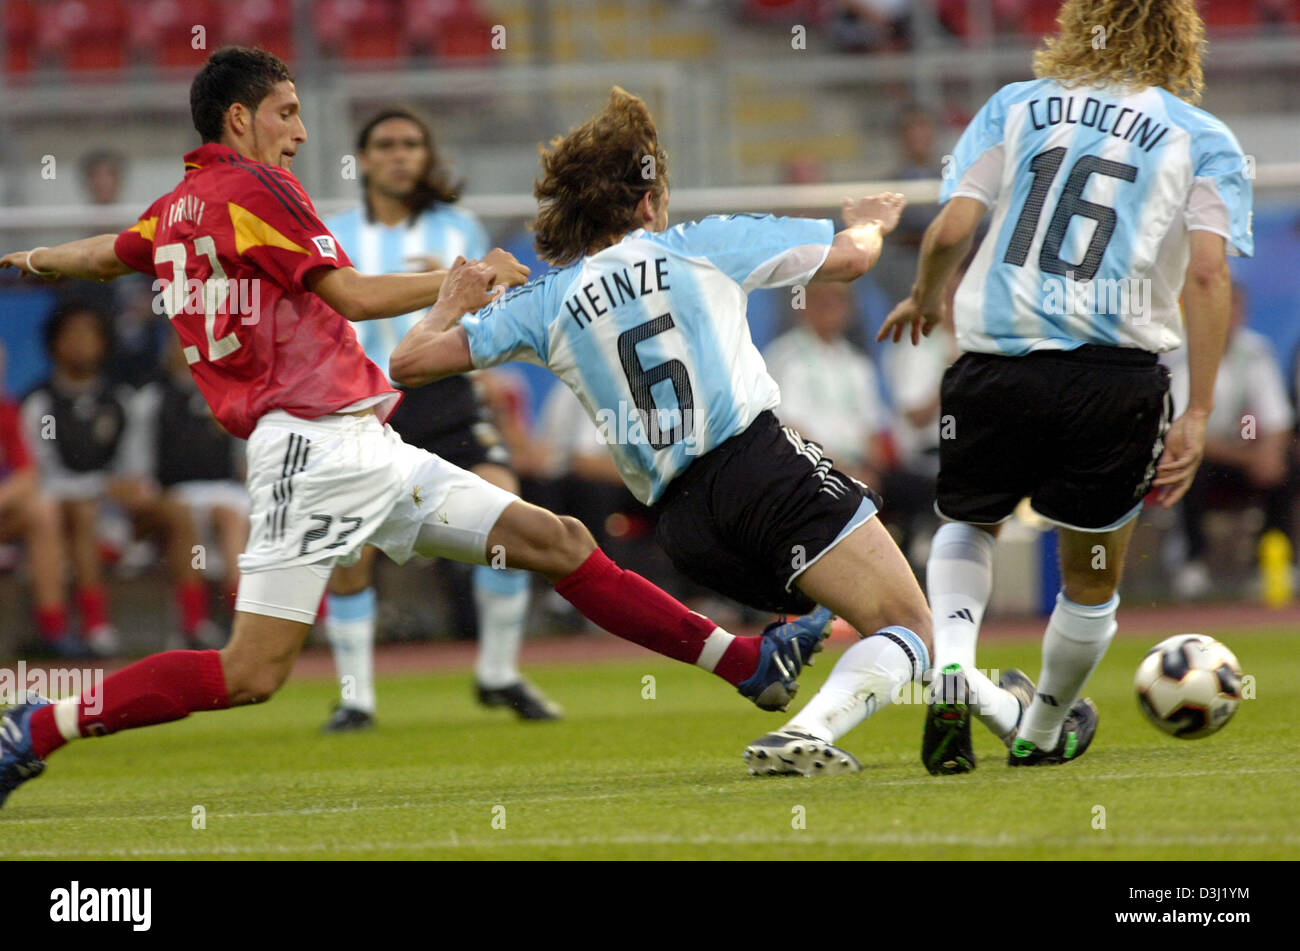 (dpa) - German soccer player Kevin Kuranyi (L) fights with Argentinian defender Gabriel Heinze (C) for the ball during their match at the FIFA Confederations Cup 2005 at the Franken-Stadium in Nuremberg, Germany, 21 June 2005. The match ended in a 2-2 draw. Stock Photo